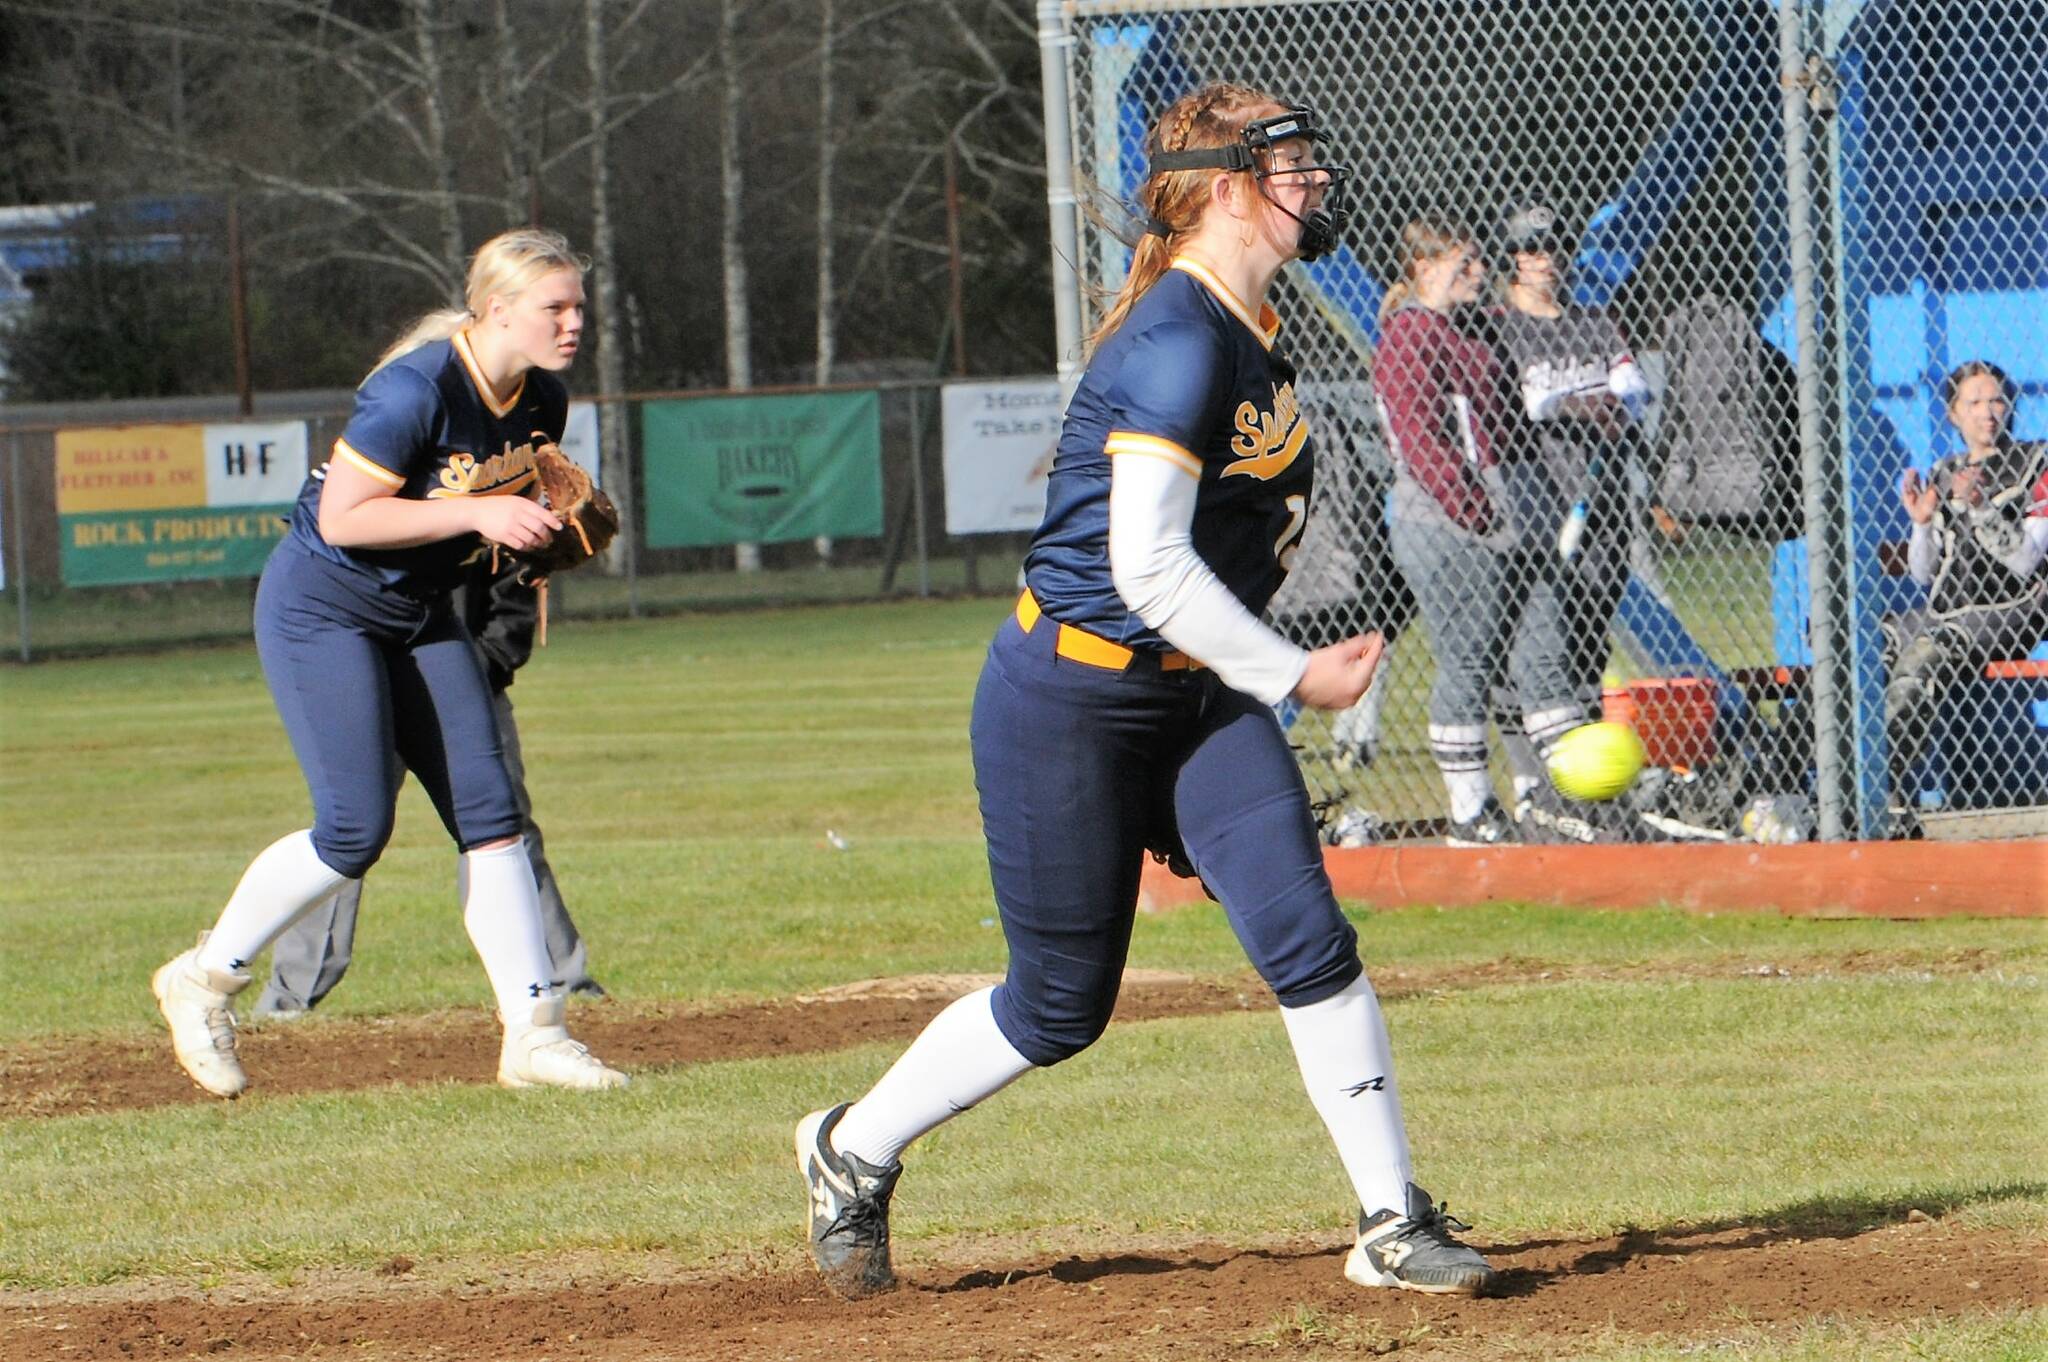 Spartan Grace Gooding pitched the second game while Kyra Neel looked on from first base.